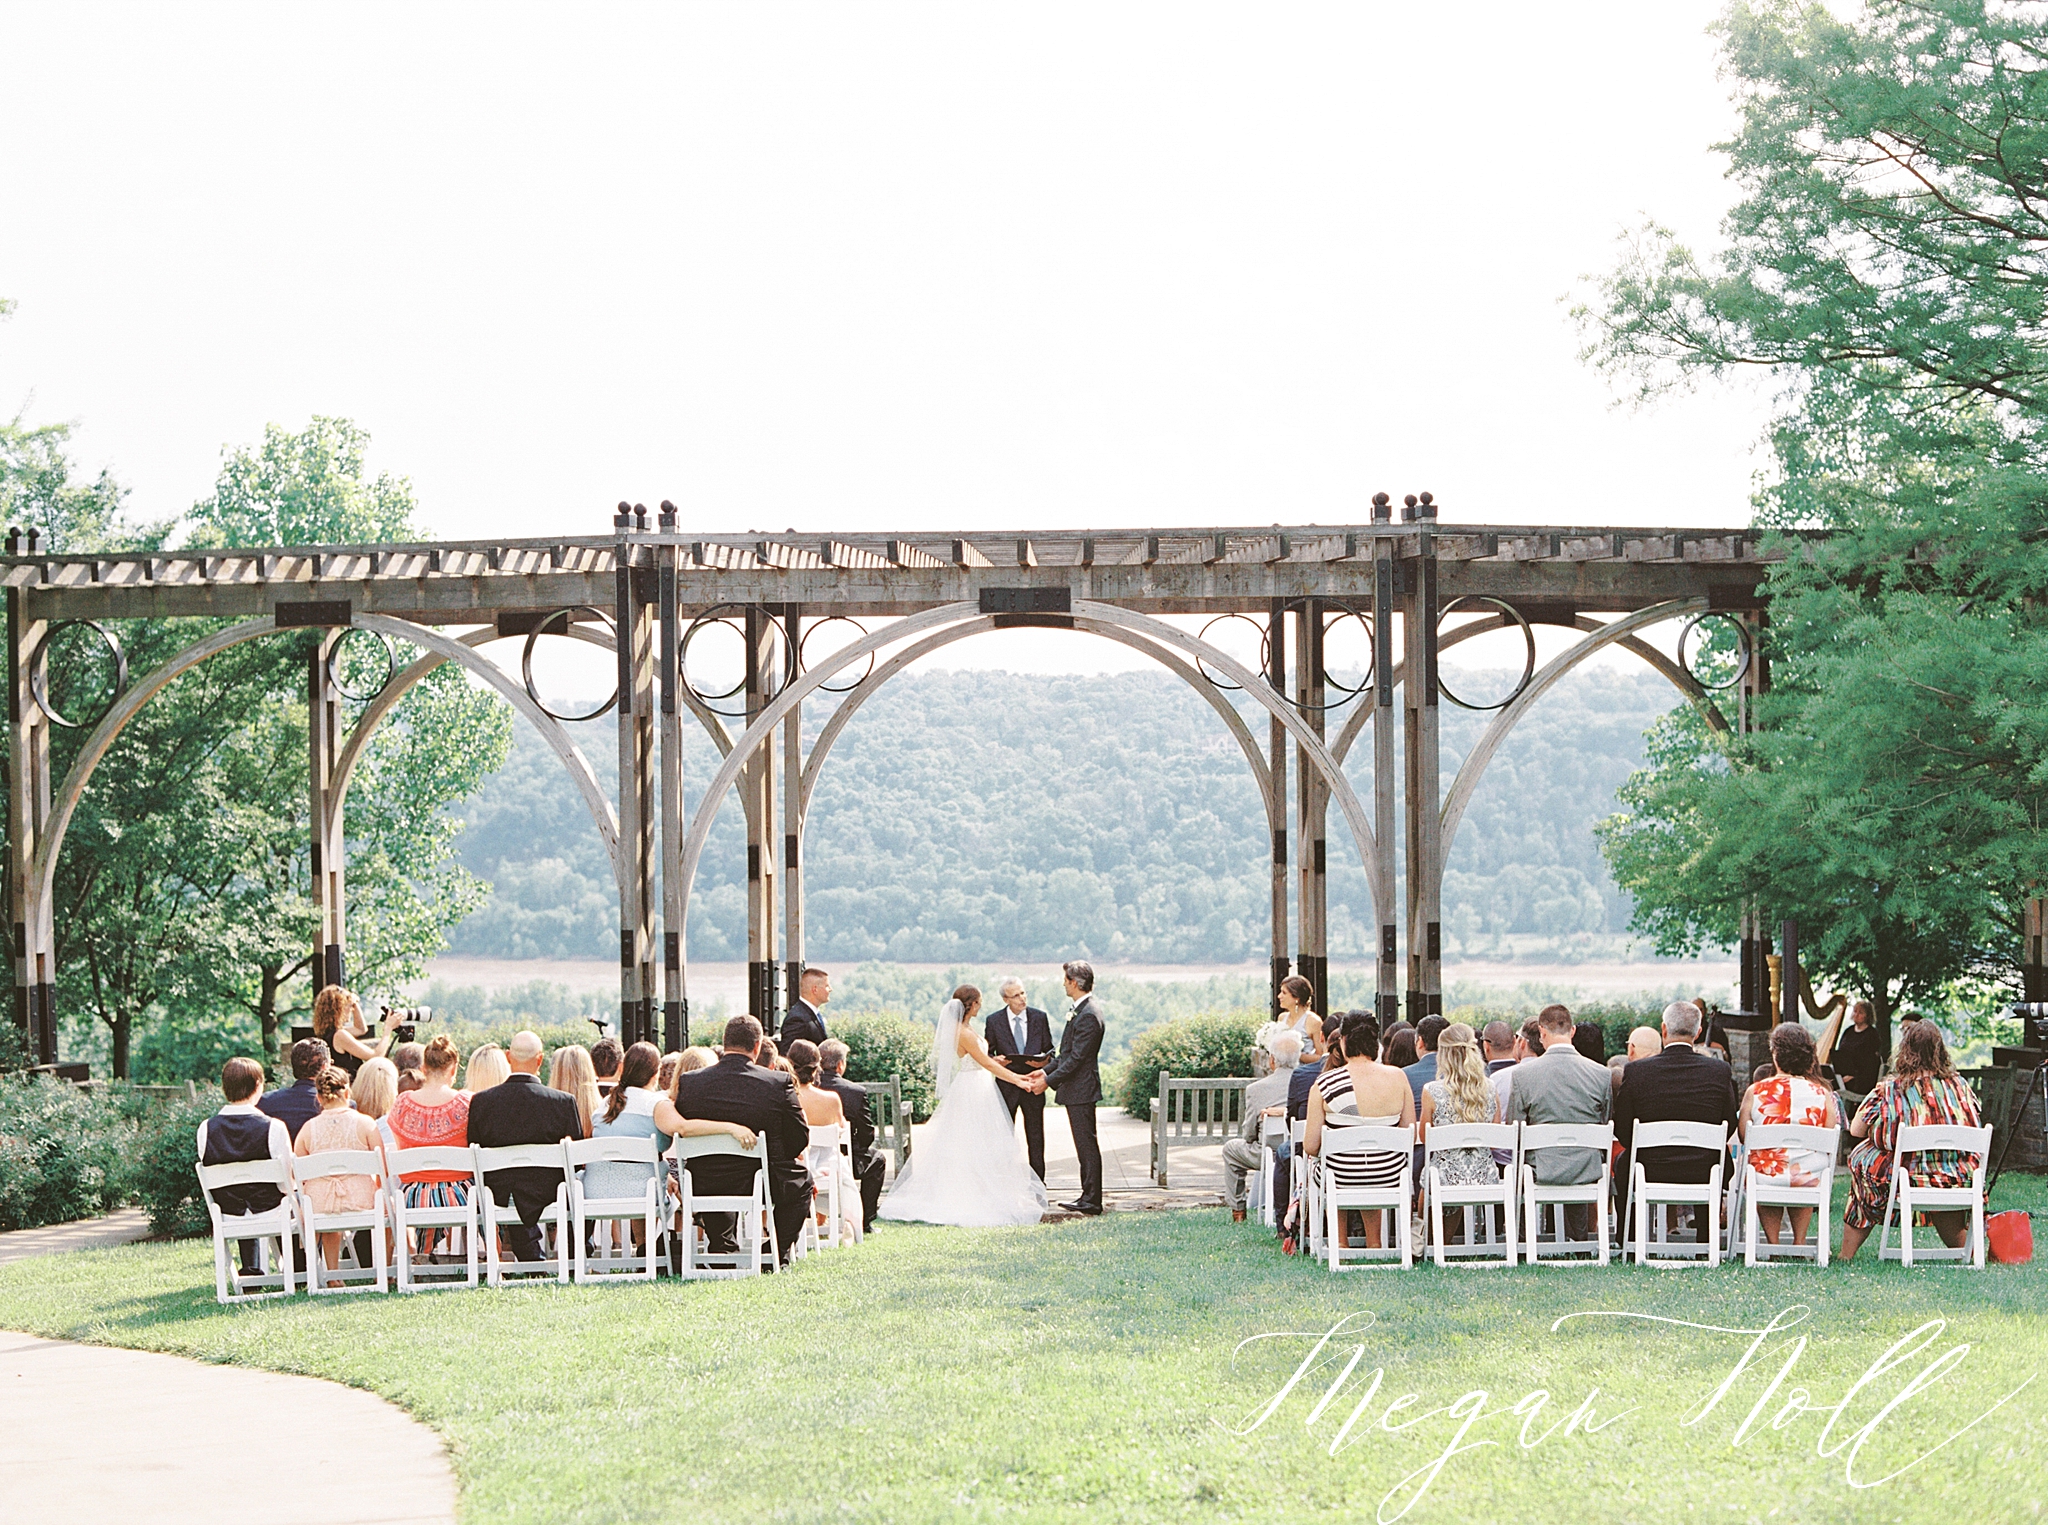 Outdoor ceremony with a view in Cincinnati's Alms Park